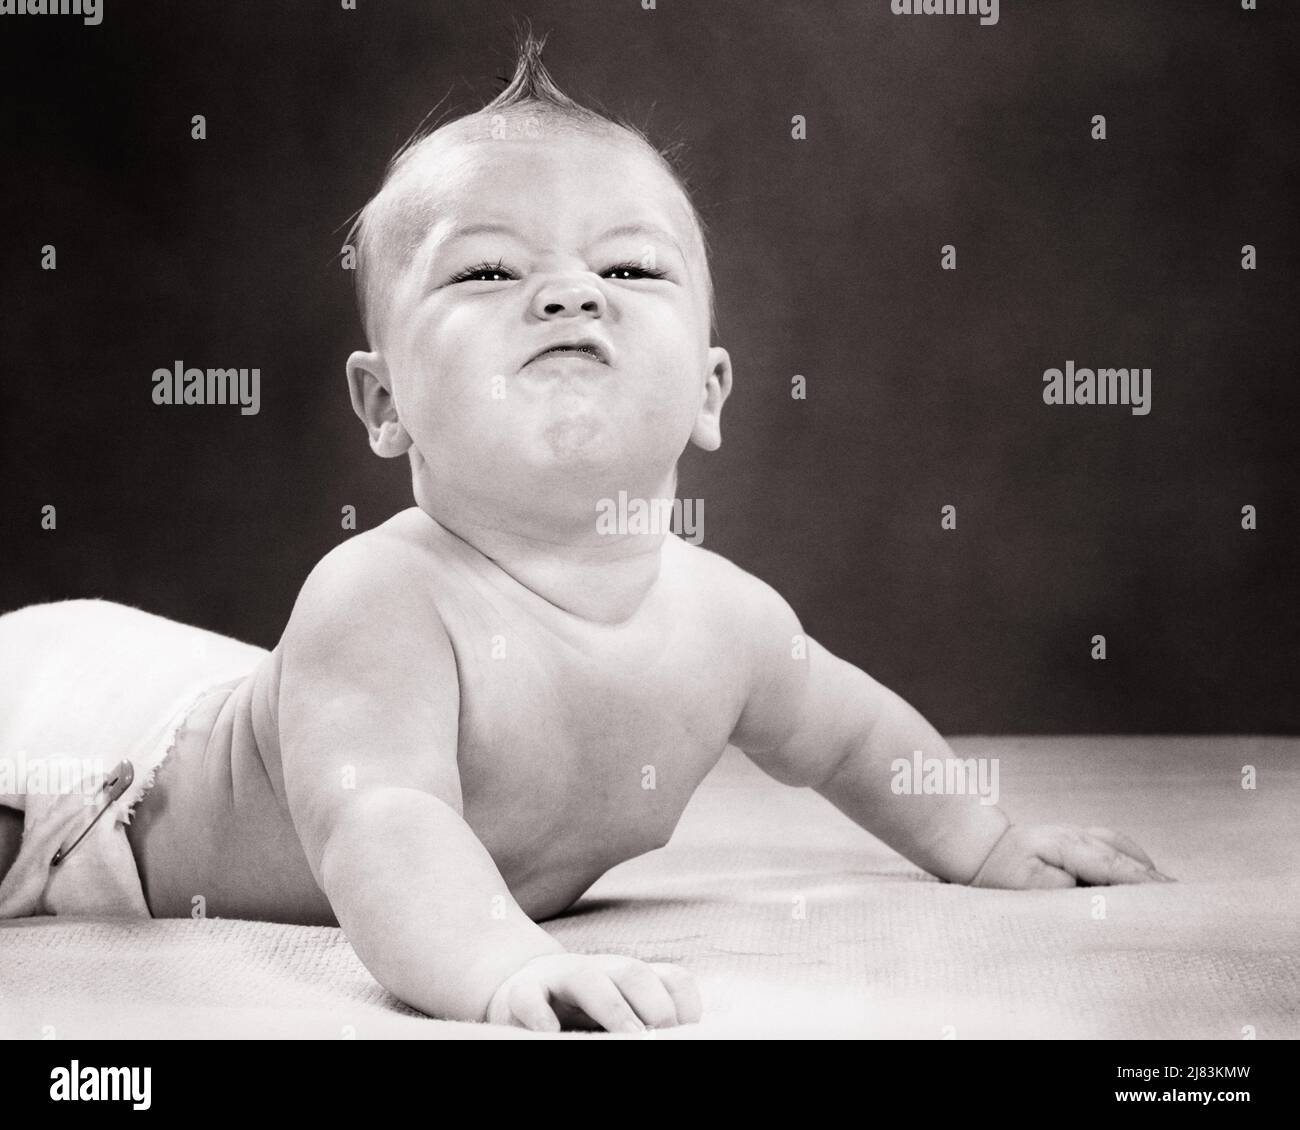 1950s BABY LYING ON STOMACH PUSHING UP HEAD RAISED DEFIANTLY SCRUNCHED UP FUNNY FACIAL EXPRESSION LOOKING AT CAMERA - b4740 HAR001 HARS EXPRESSIONS B&W HUMOROUS STOMACH LOW ANGLE COMICAL DIAPERS UP CONCEPTUAL COMEDY FEISTY BABY BOY BELLIGERENT SMART WISE GUY AGGRESSIVE GROWTH JUVENILES REBELLIOUS SCRUNCHED ARROGANT ATTITUDE BLACK AND WHITE CAUCASIAN ETHNICITY DEFIANT HAR001 OLD FASHIONED Stock Photo